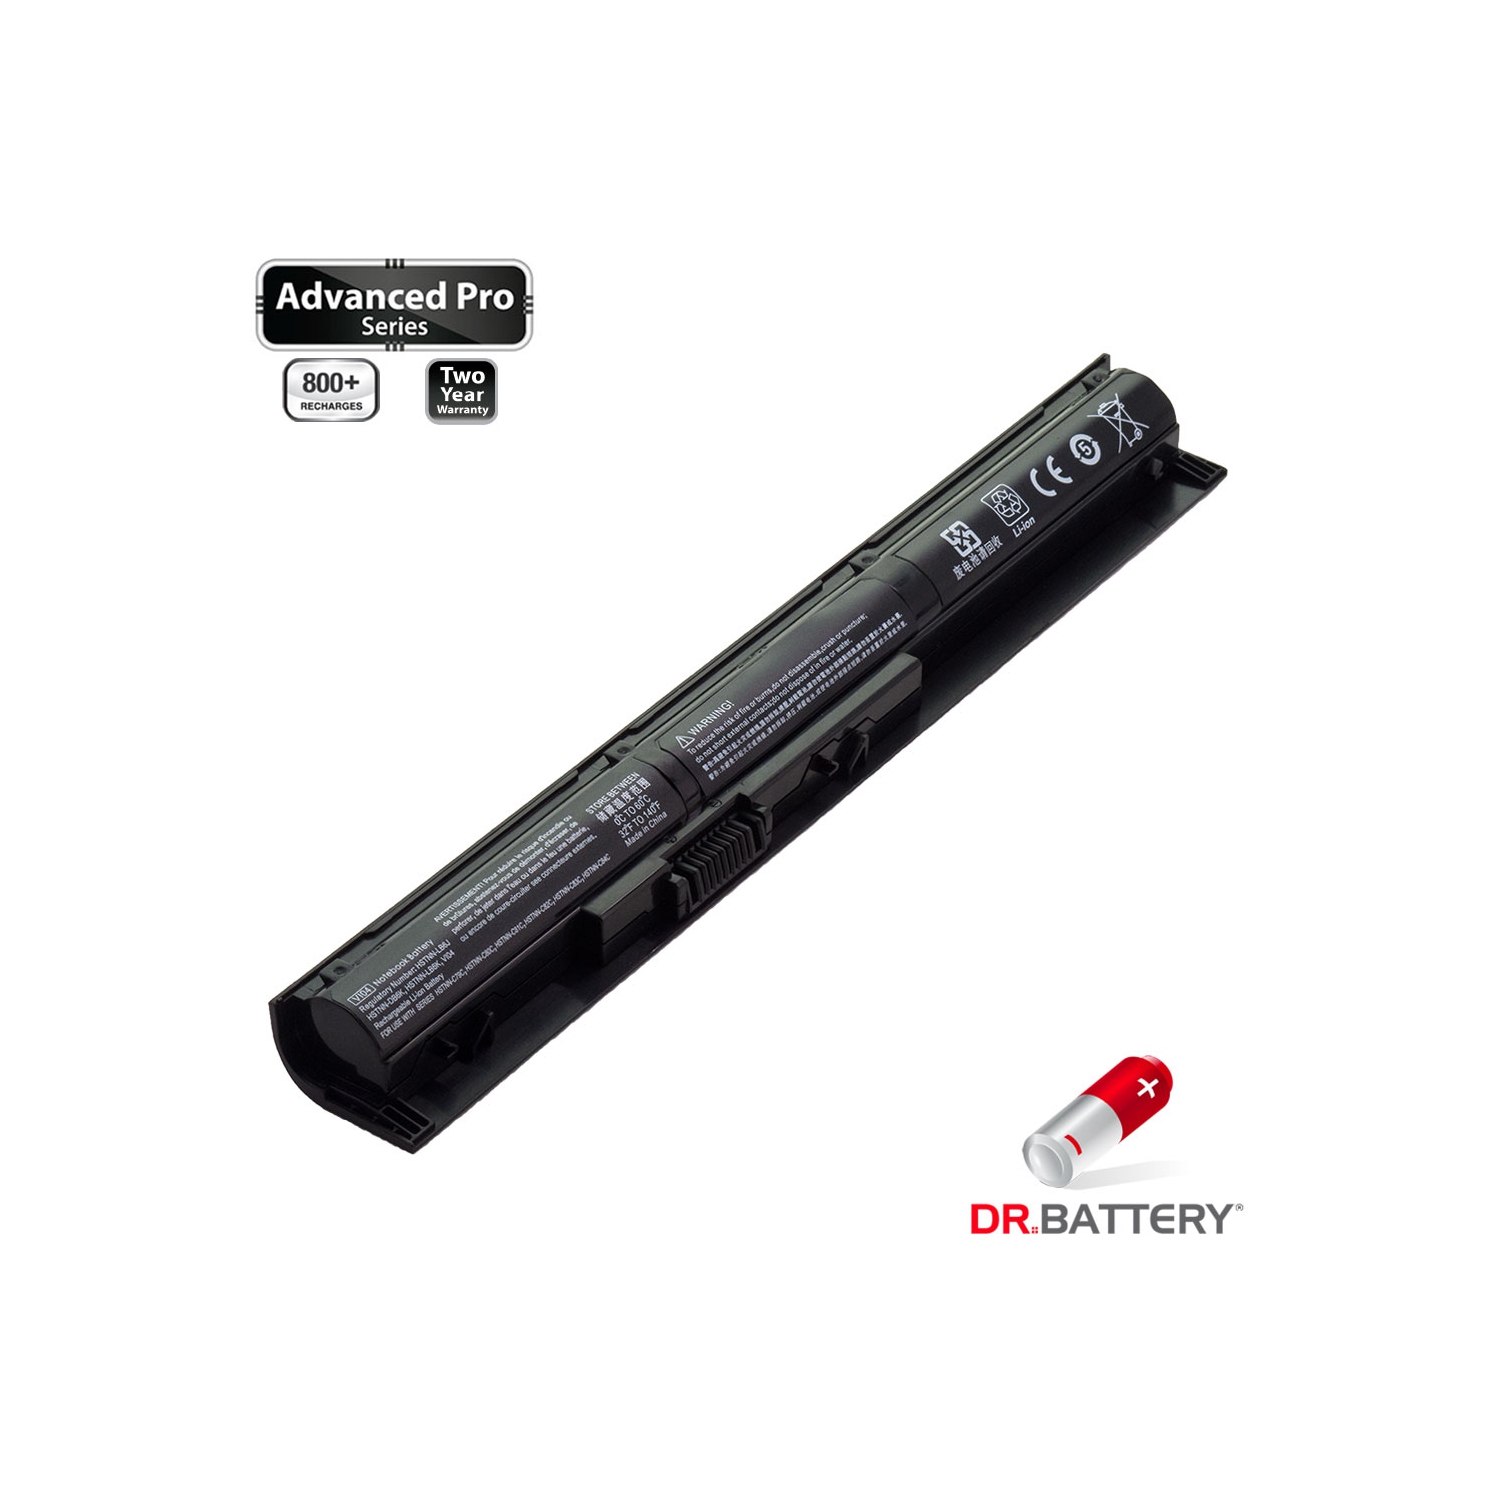 DR. BATTERY - Samsung SDI Cells for HP ProBook 440 G2 / 450 G2 / 455 G2 / 756743-001 / 756744-001 - Free Shipping